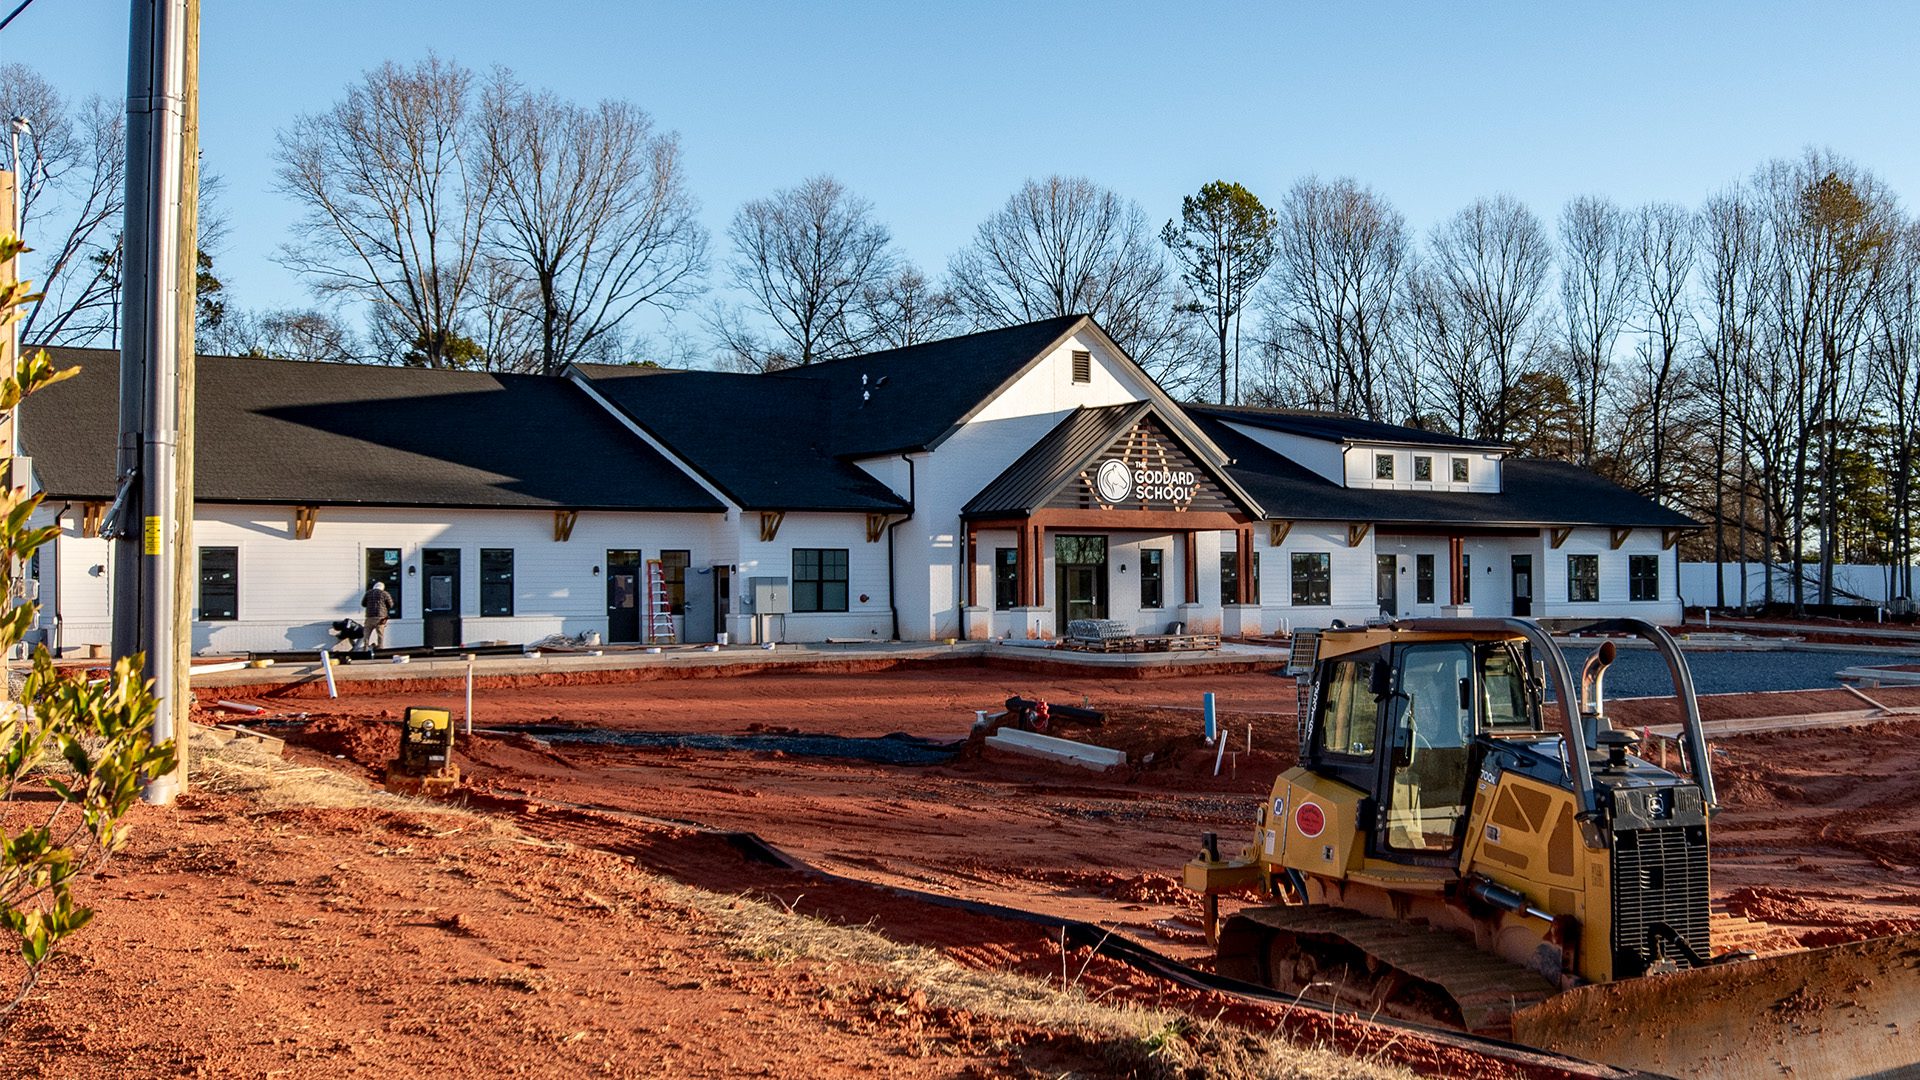 The Goddard School daycare under construction at The Overlook at Gold Hill